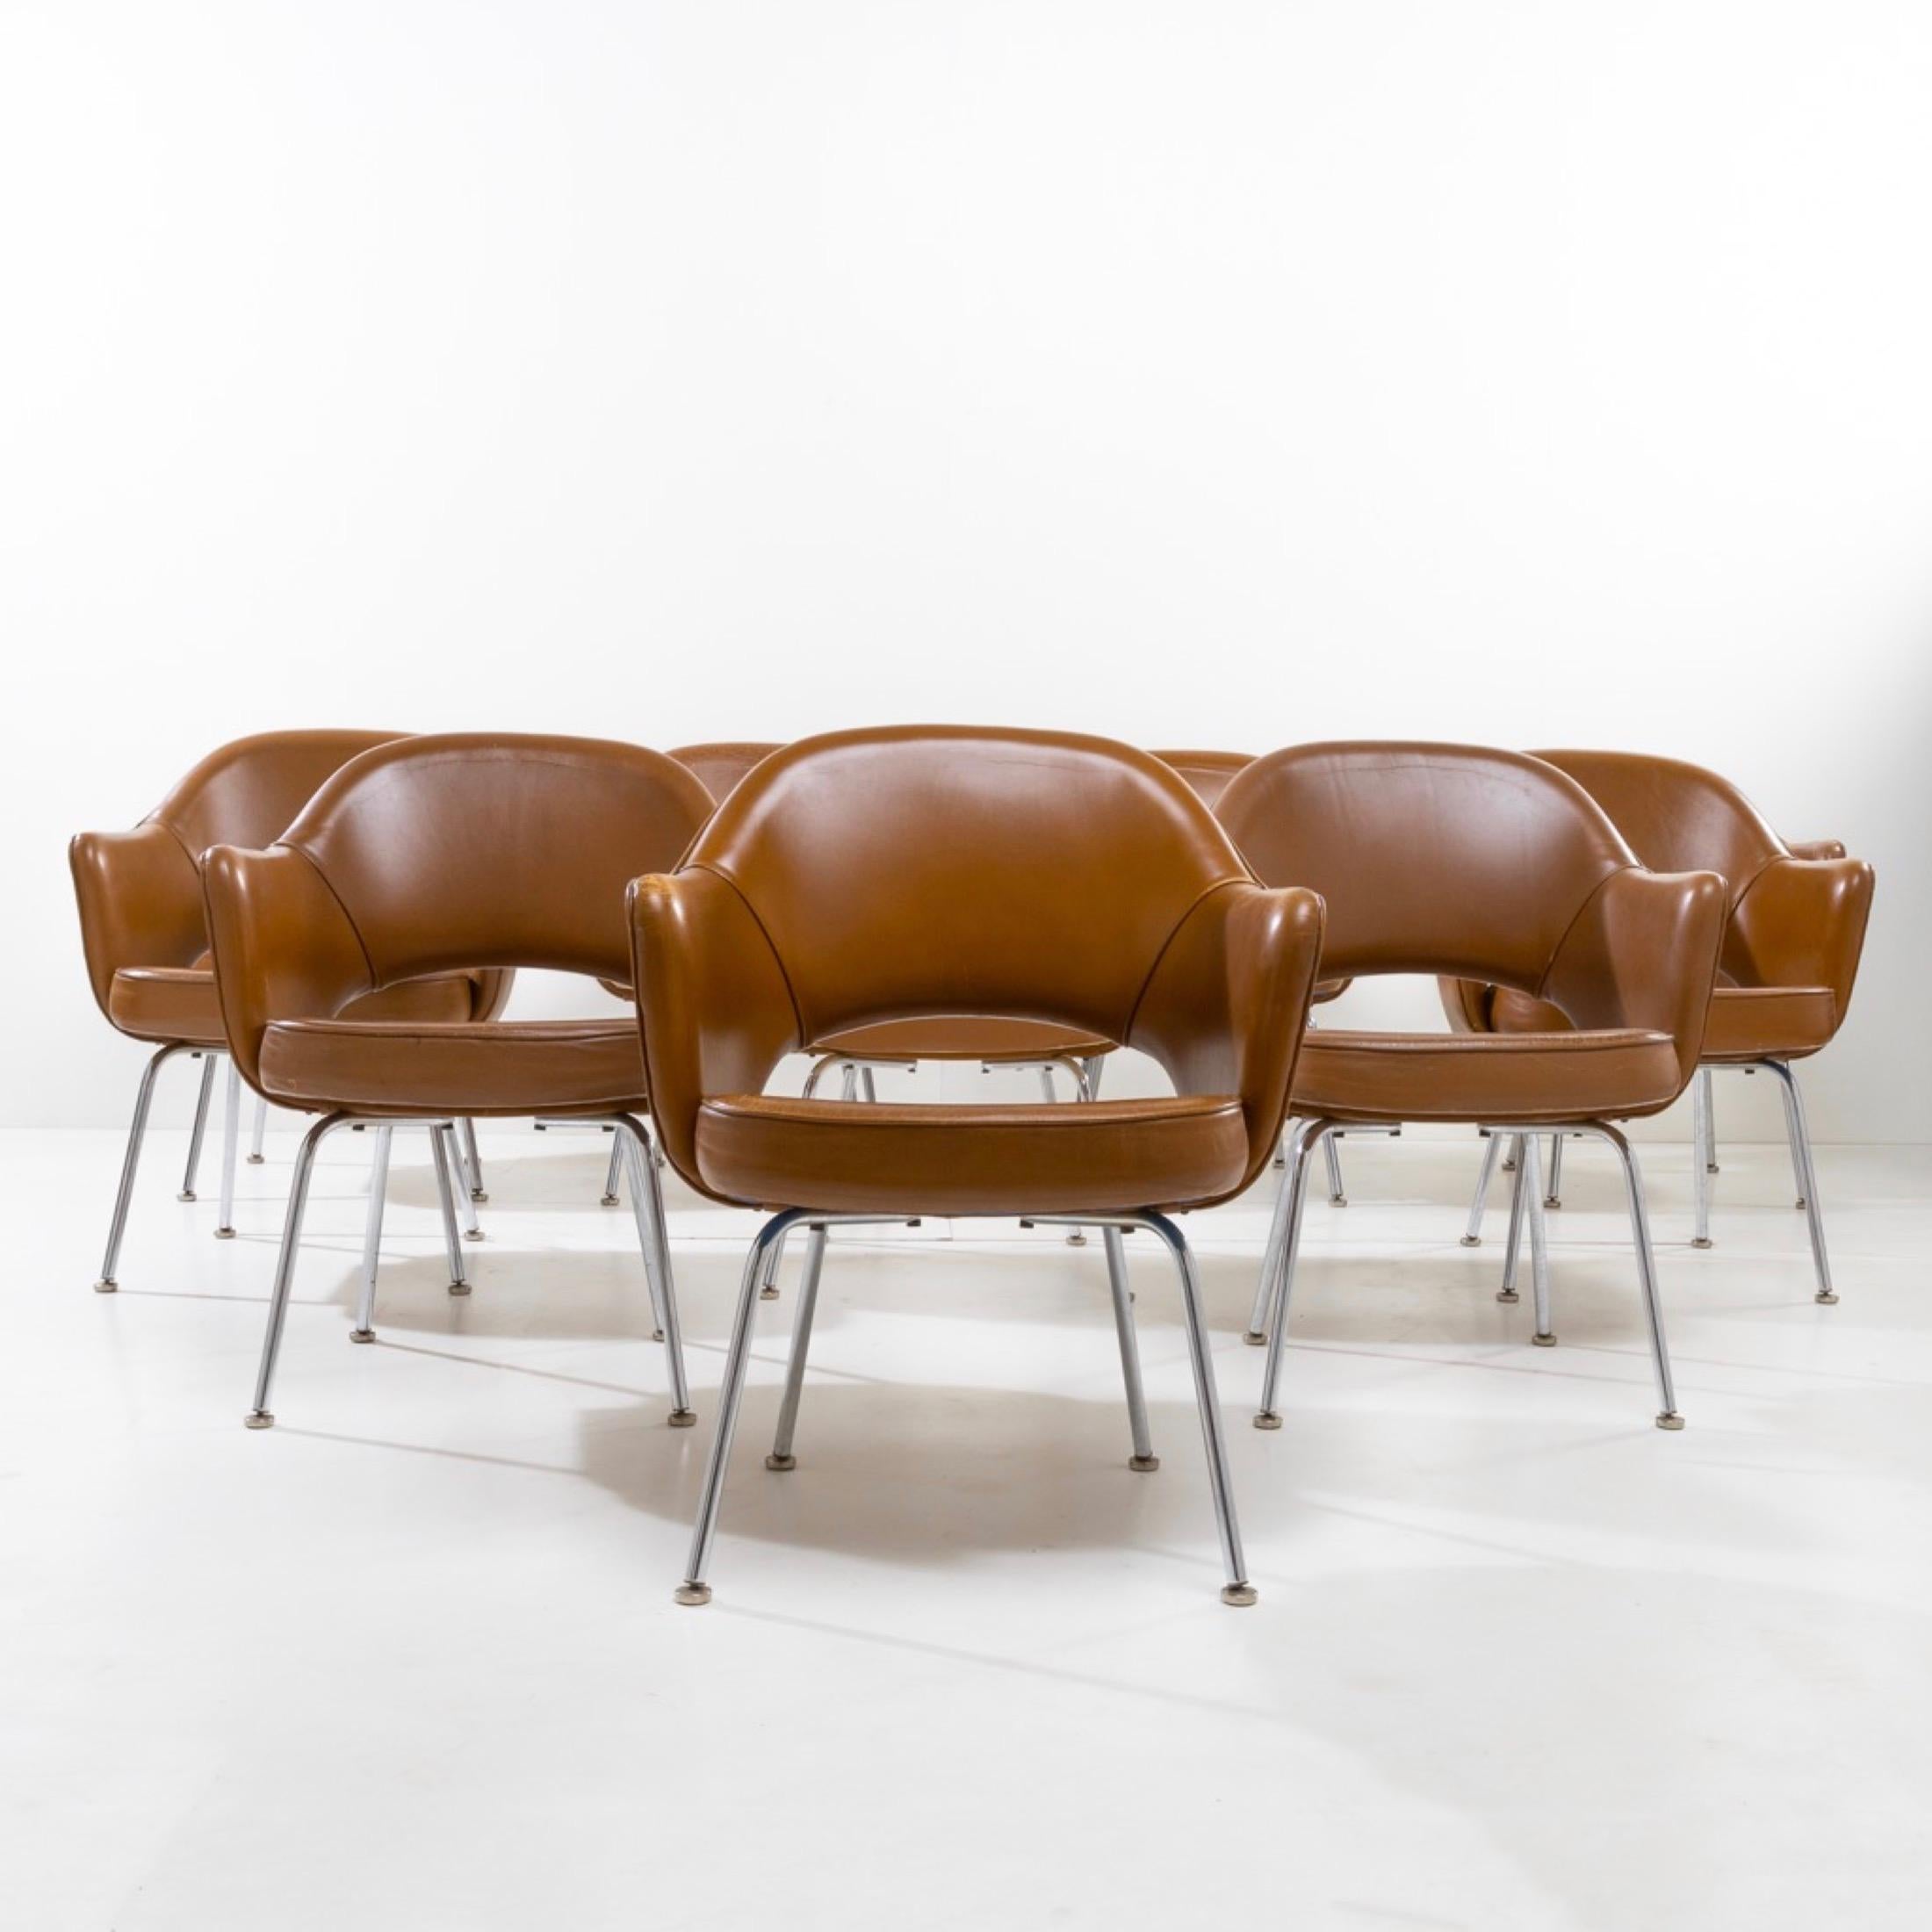 Set of 8 “Saarinen Executive” armchairs with tubular legs.
Cognac-colored leather cover.
This armchair with ample shapes offers excellent comfort.
Featured in many interiors, Eero Saarinen’s chair has remained a design classic for 70 years.